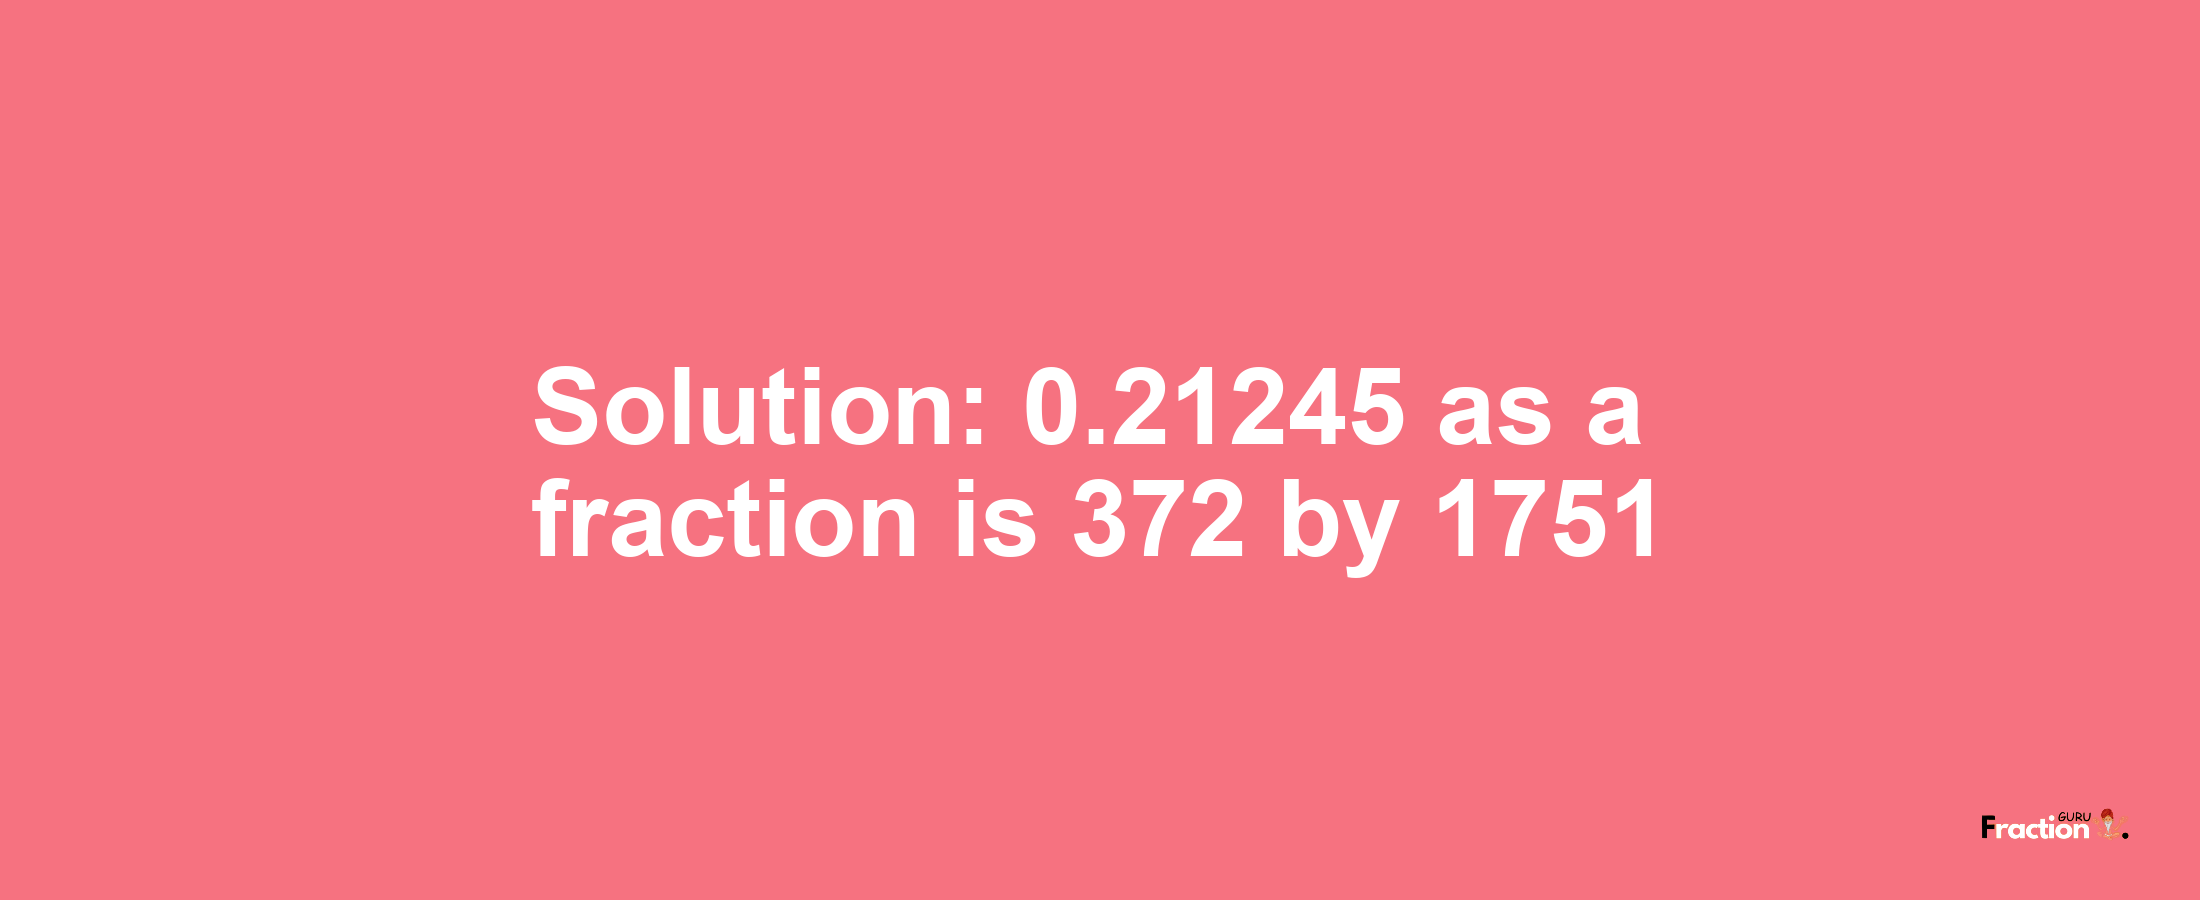 Solution:0.21245 as a fraction is 372/1751